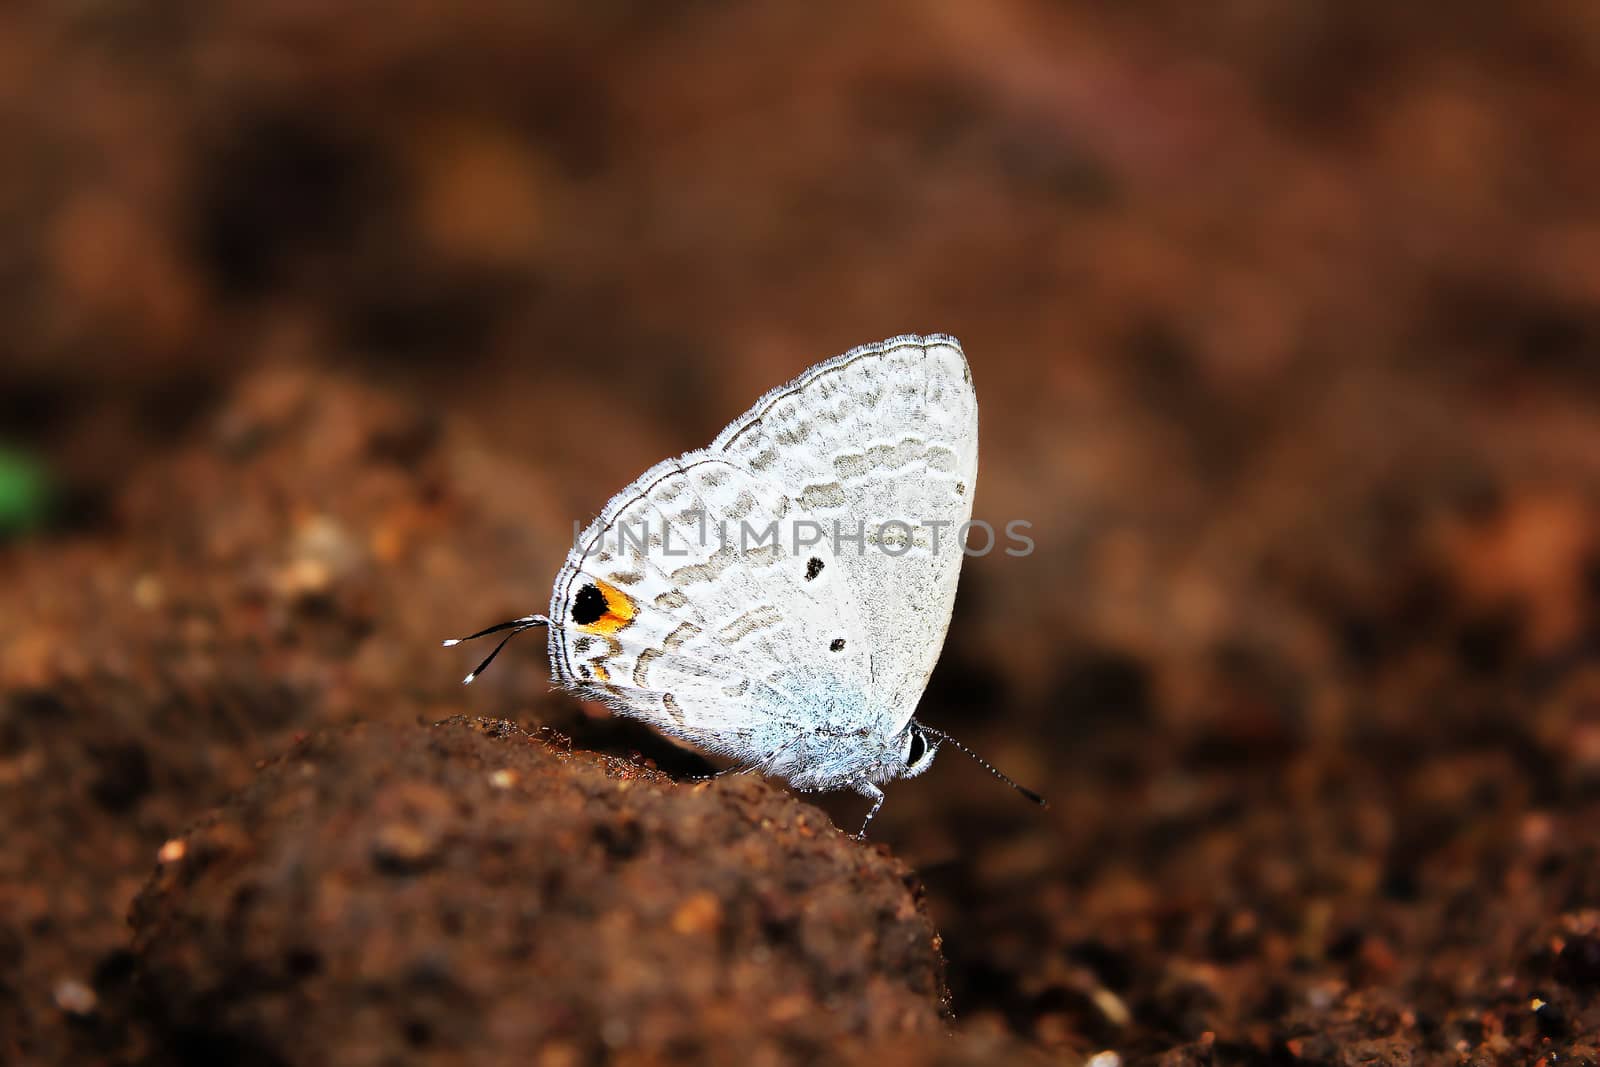 Euchrysops cnejus, the gram blue, is a small butterfly that belongs to the lycaenids or blues family.